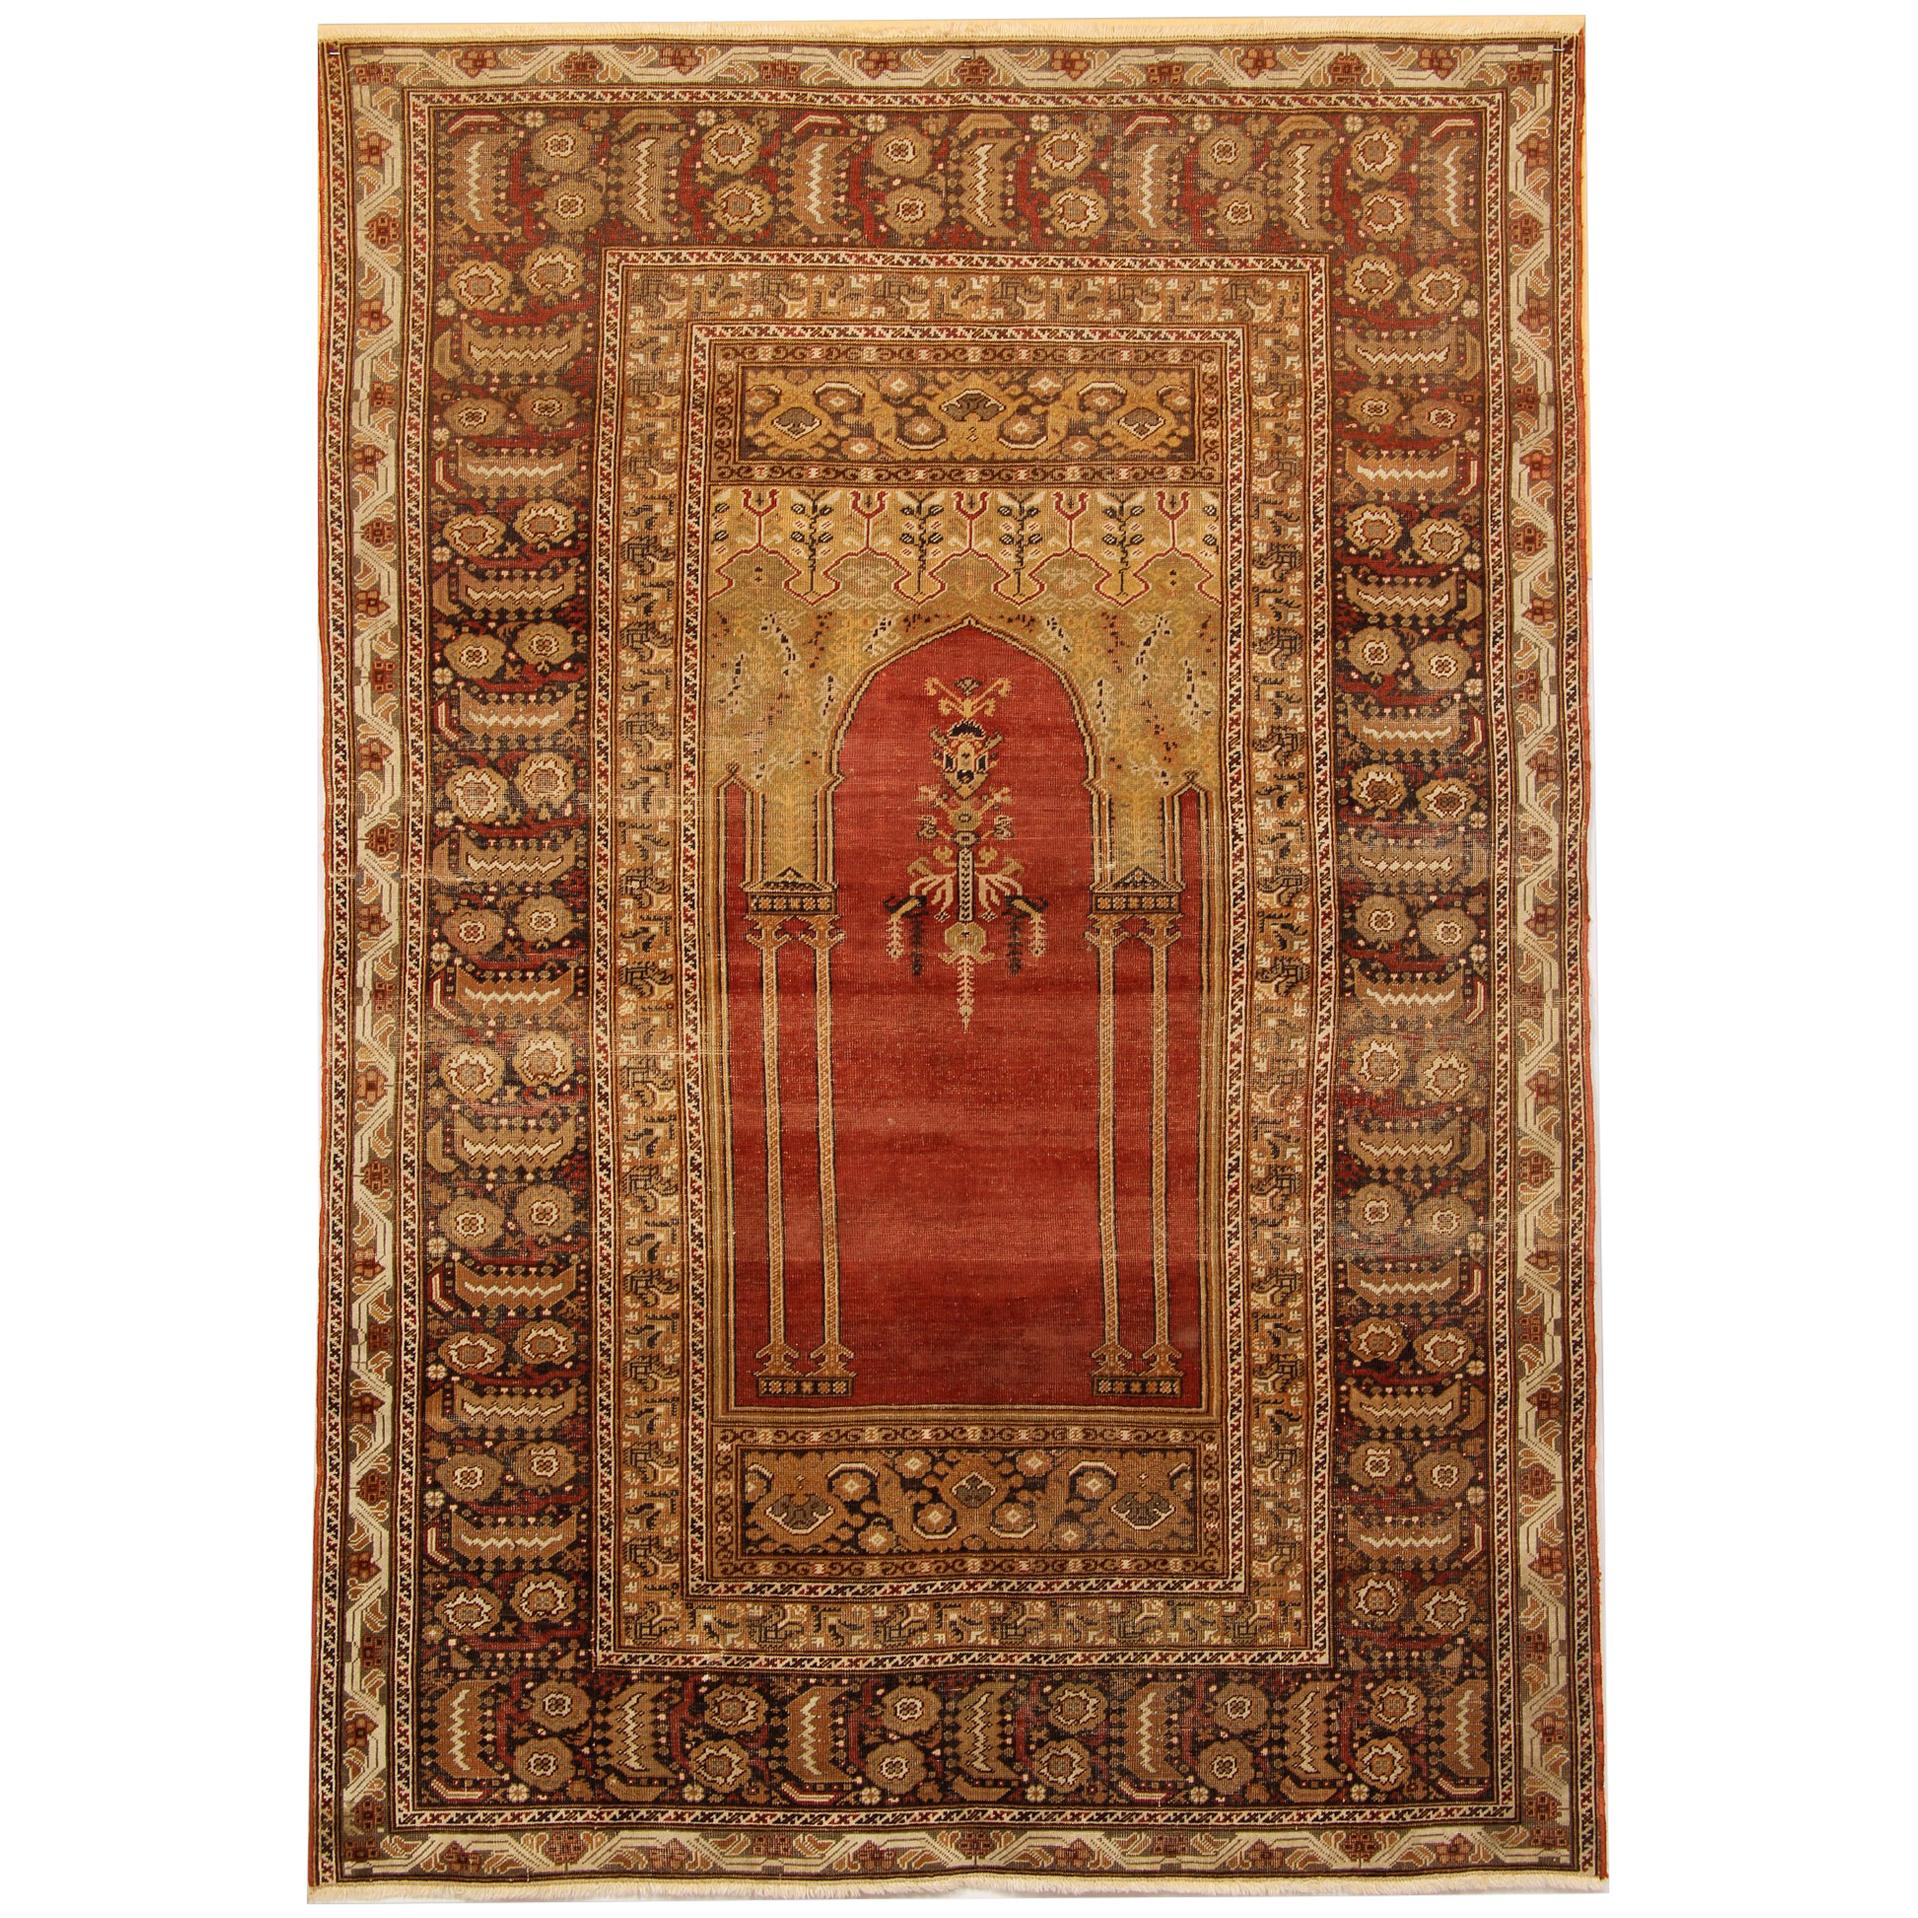 Red Antique Rugs, Traditional Carpet Turkish Rug, Mihrabi Living Room Rug